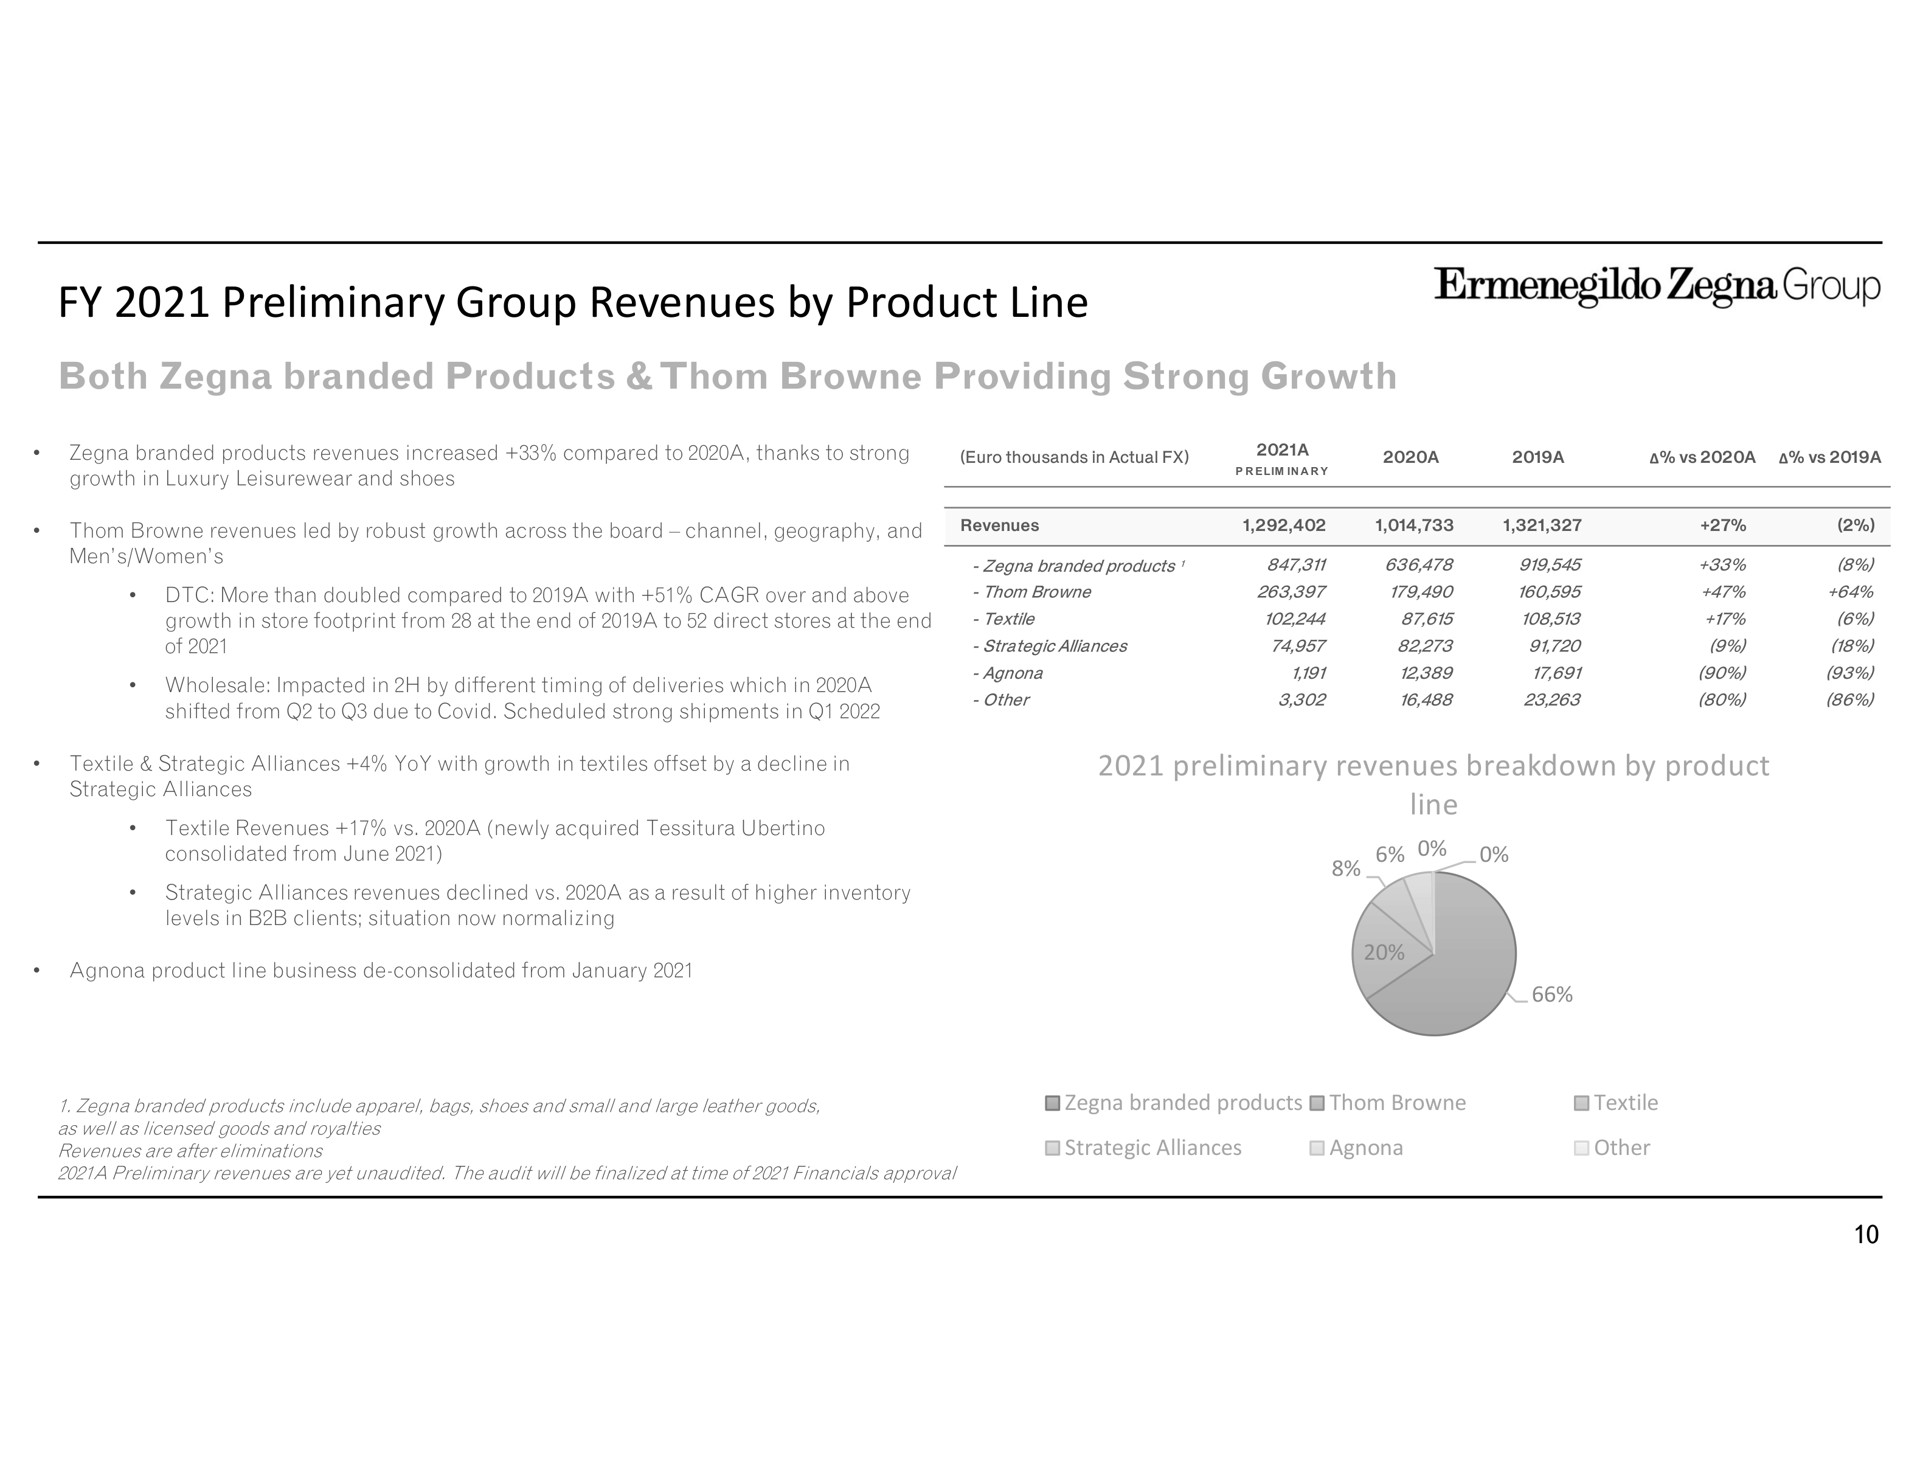 preliminary group revenues by product line both branded products providing strong growth preliminary revenues breakdown by product line | Zegna